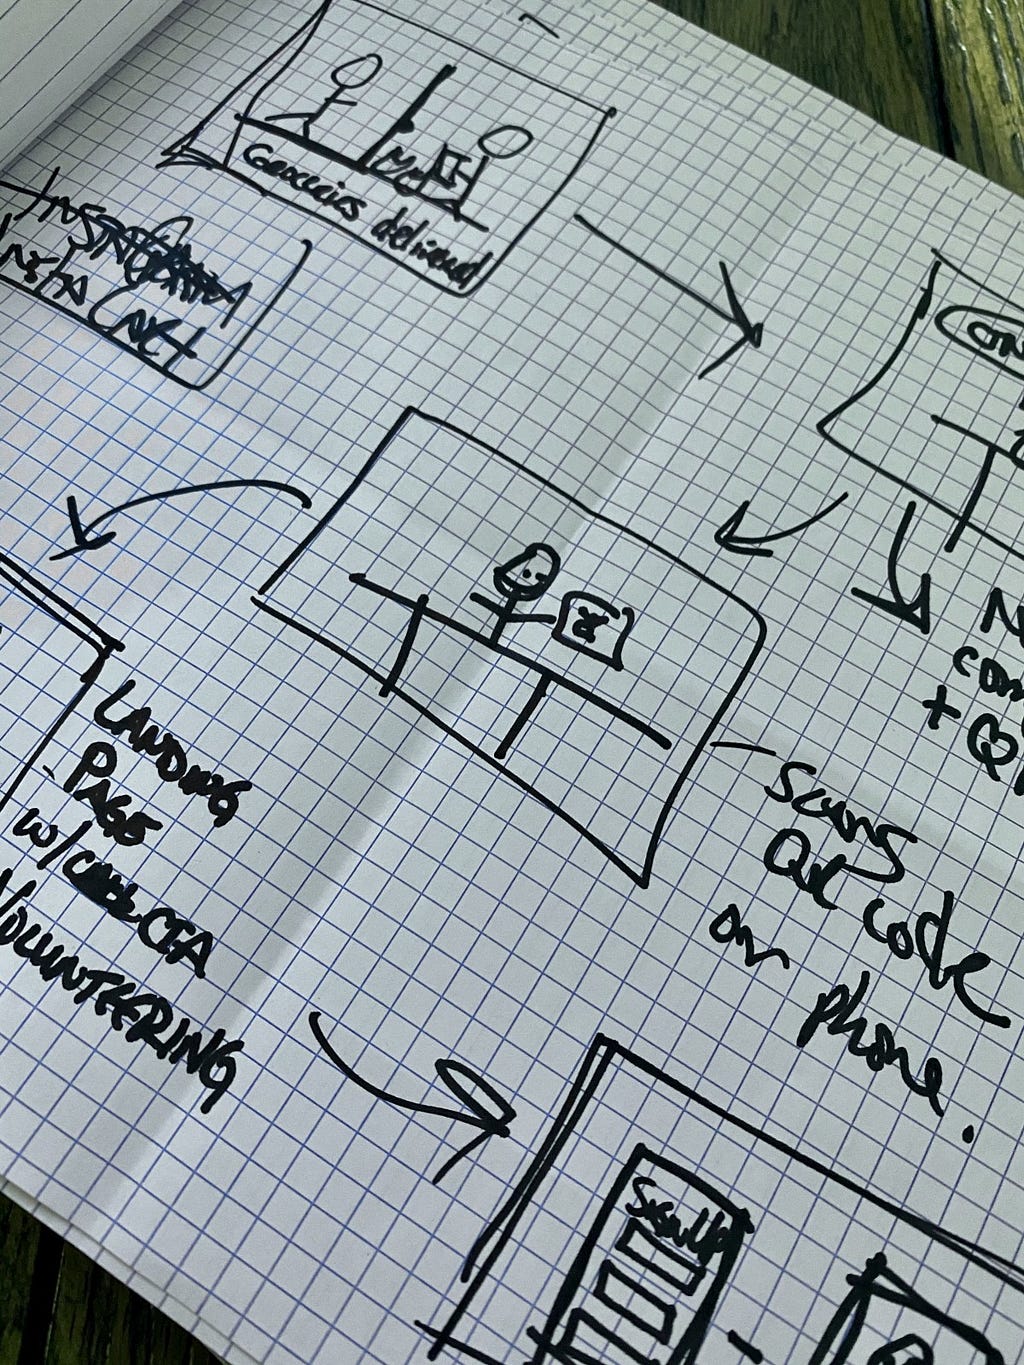 Image of a storyboard of a possible user flow